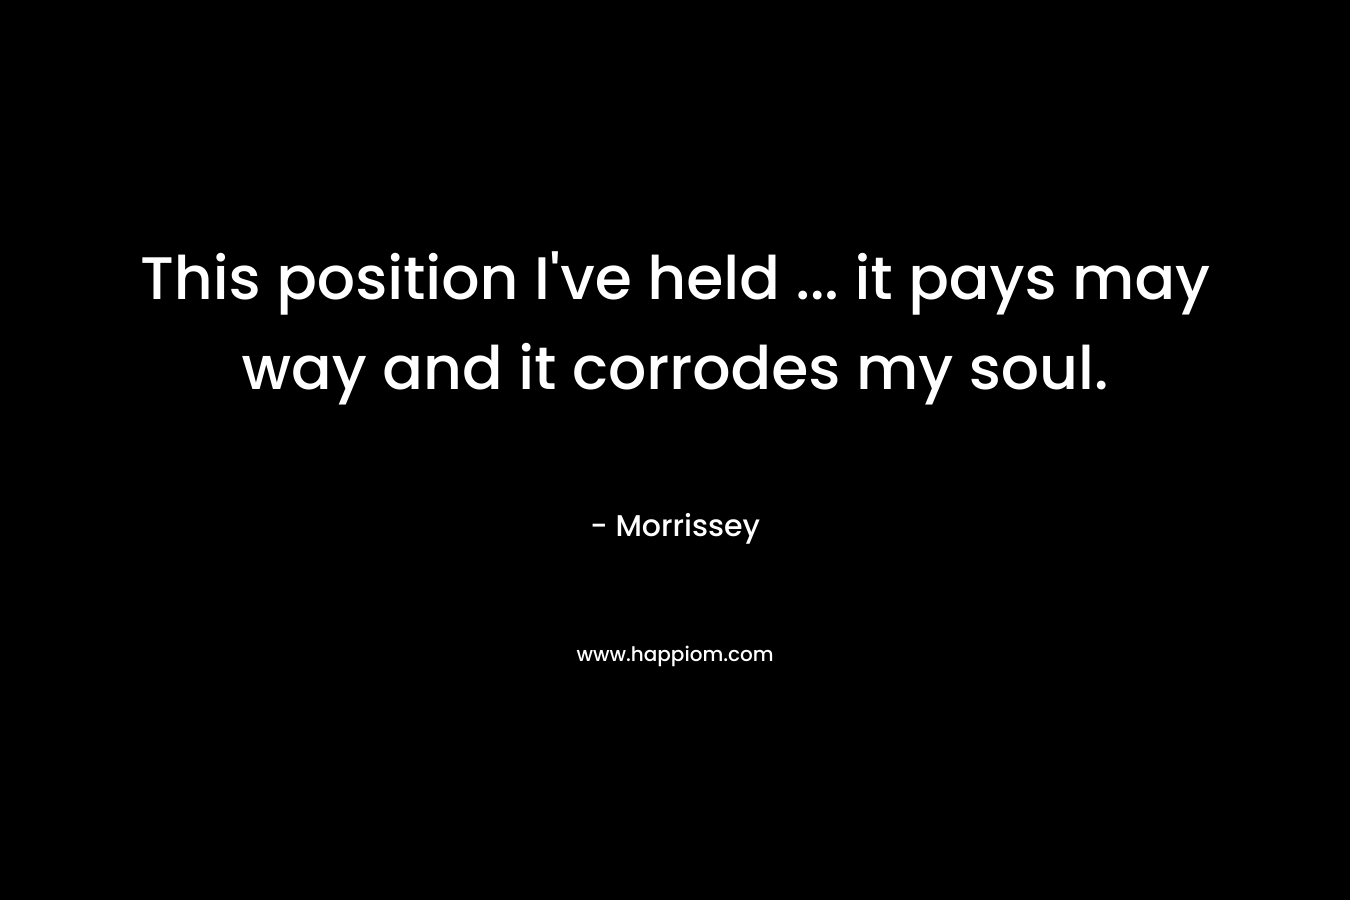 This position I've held ... it pays may way and it corrodes my soul.